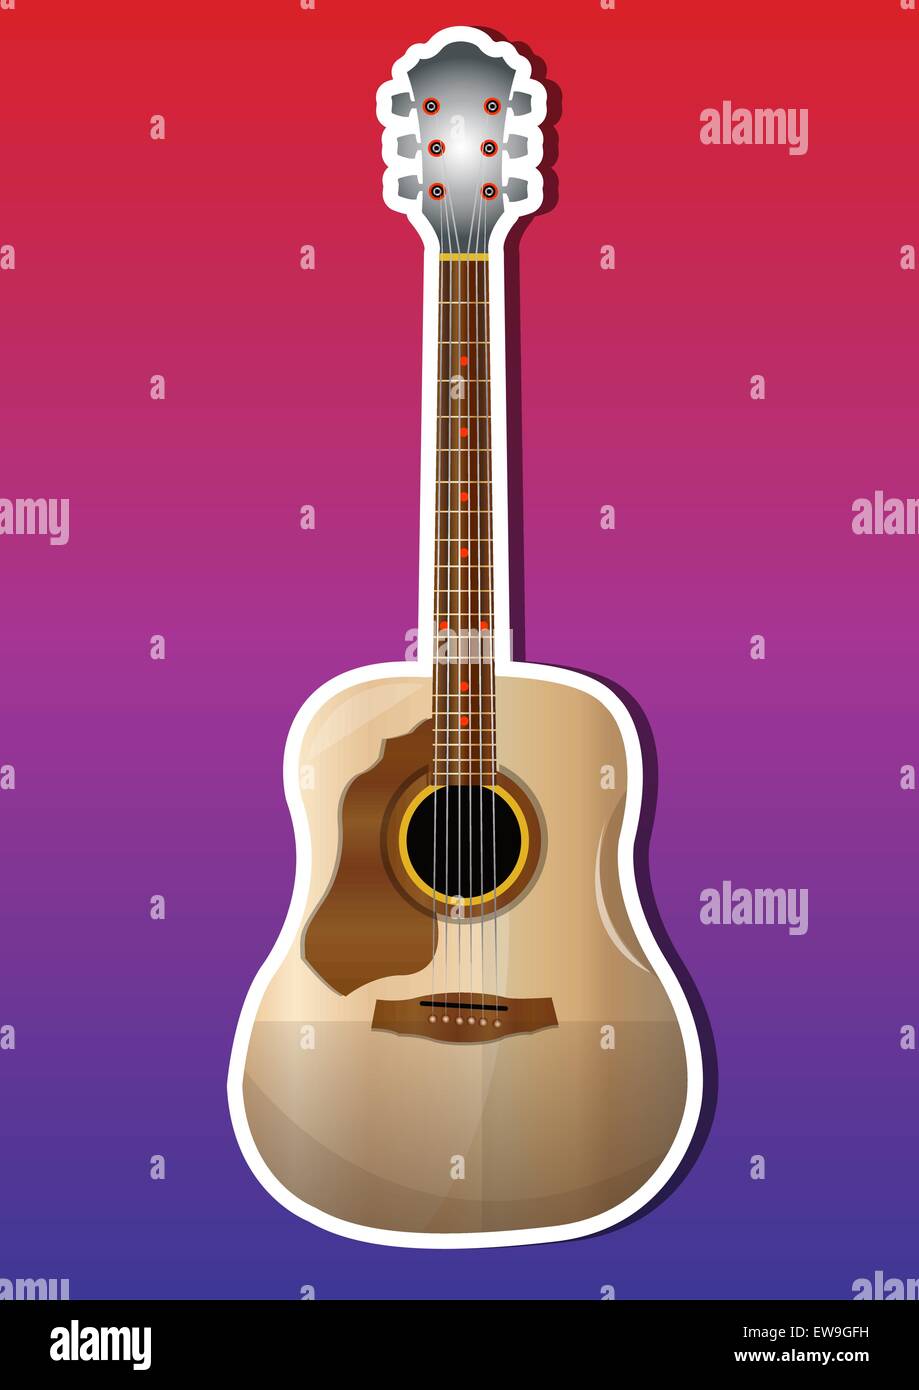 Guitar, Acoustic, Brown, vector illustration Stock Vector